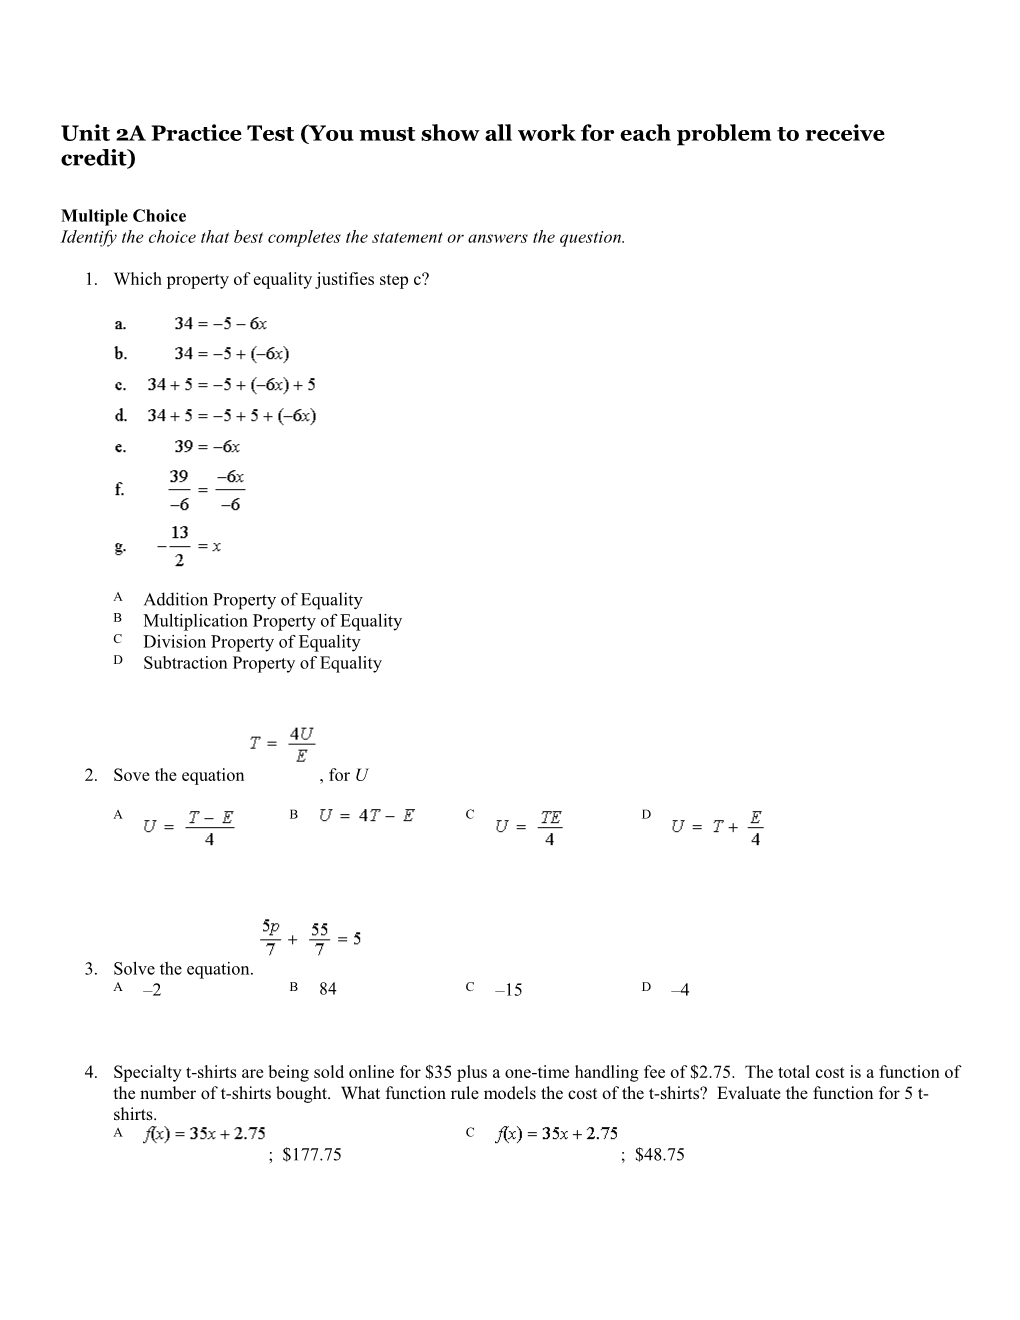 Unit 2A Practice Test (You Must Show All Work for Each Problem to Receive Credit)